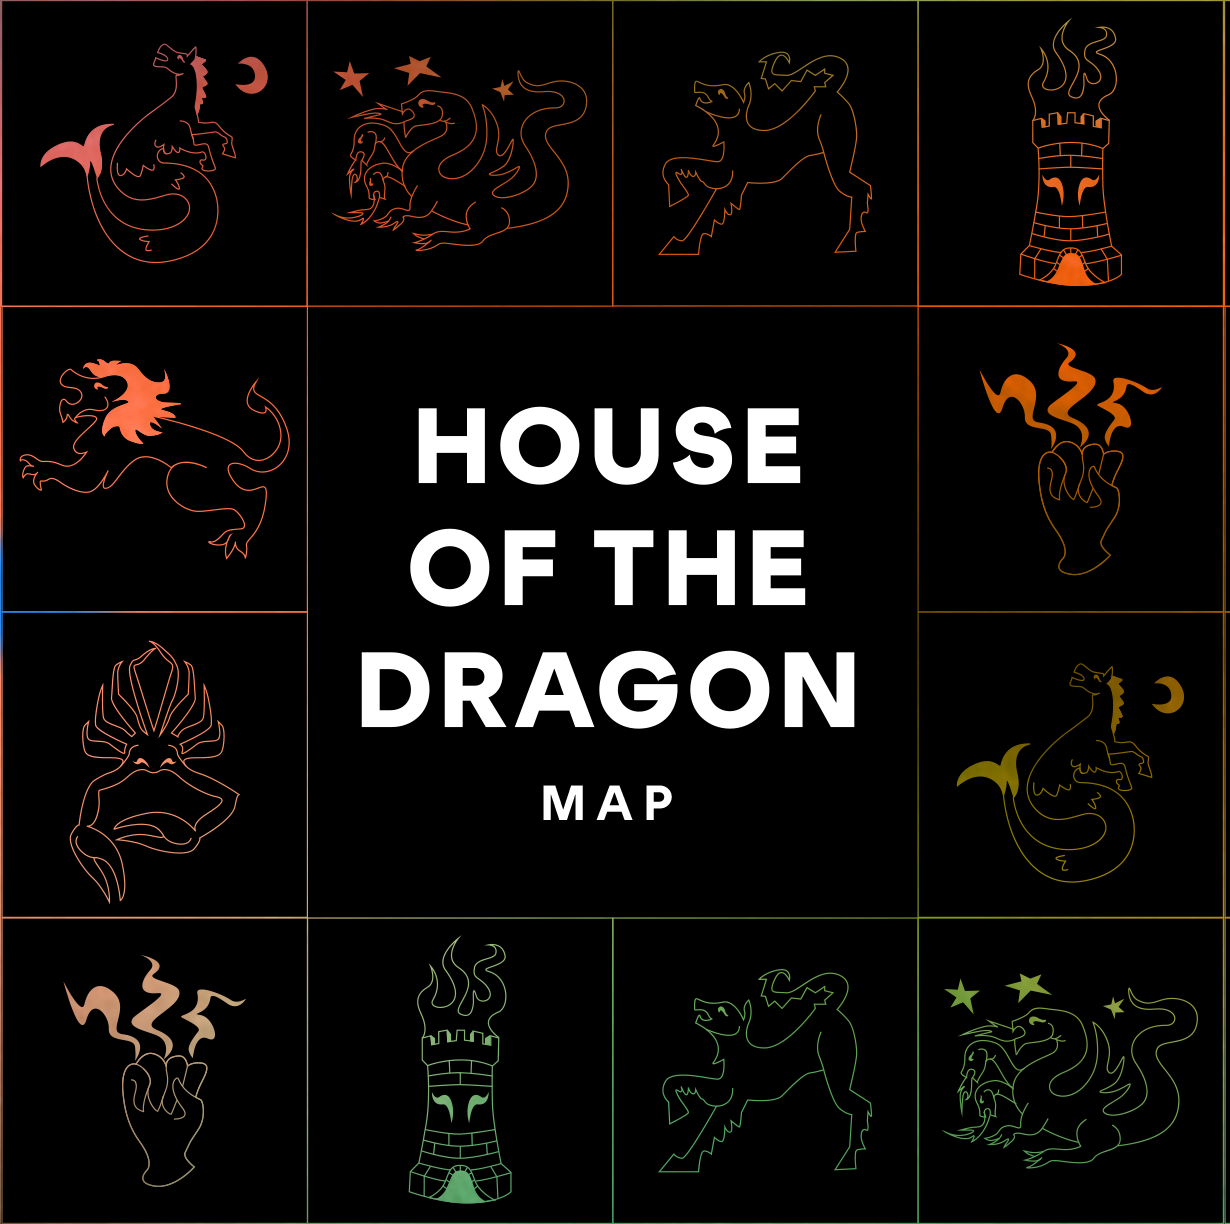 We Made a 'House of the Dragon' Map, Because This Show Can Be Confusing as Hell